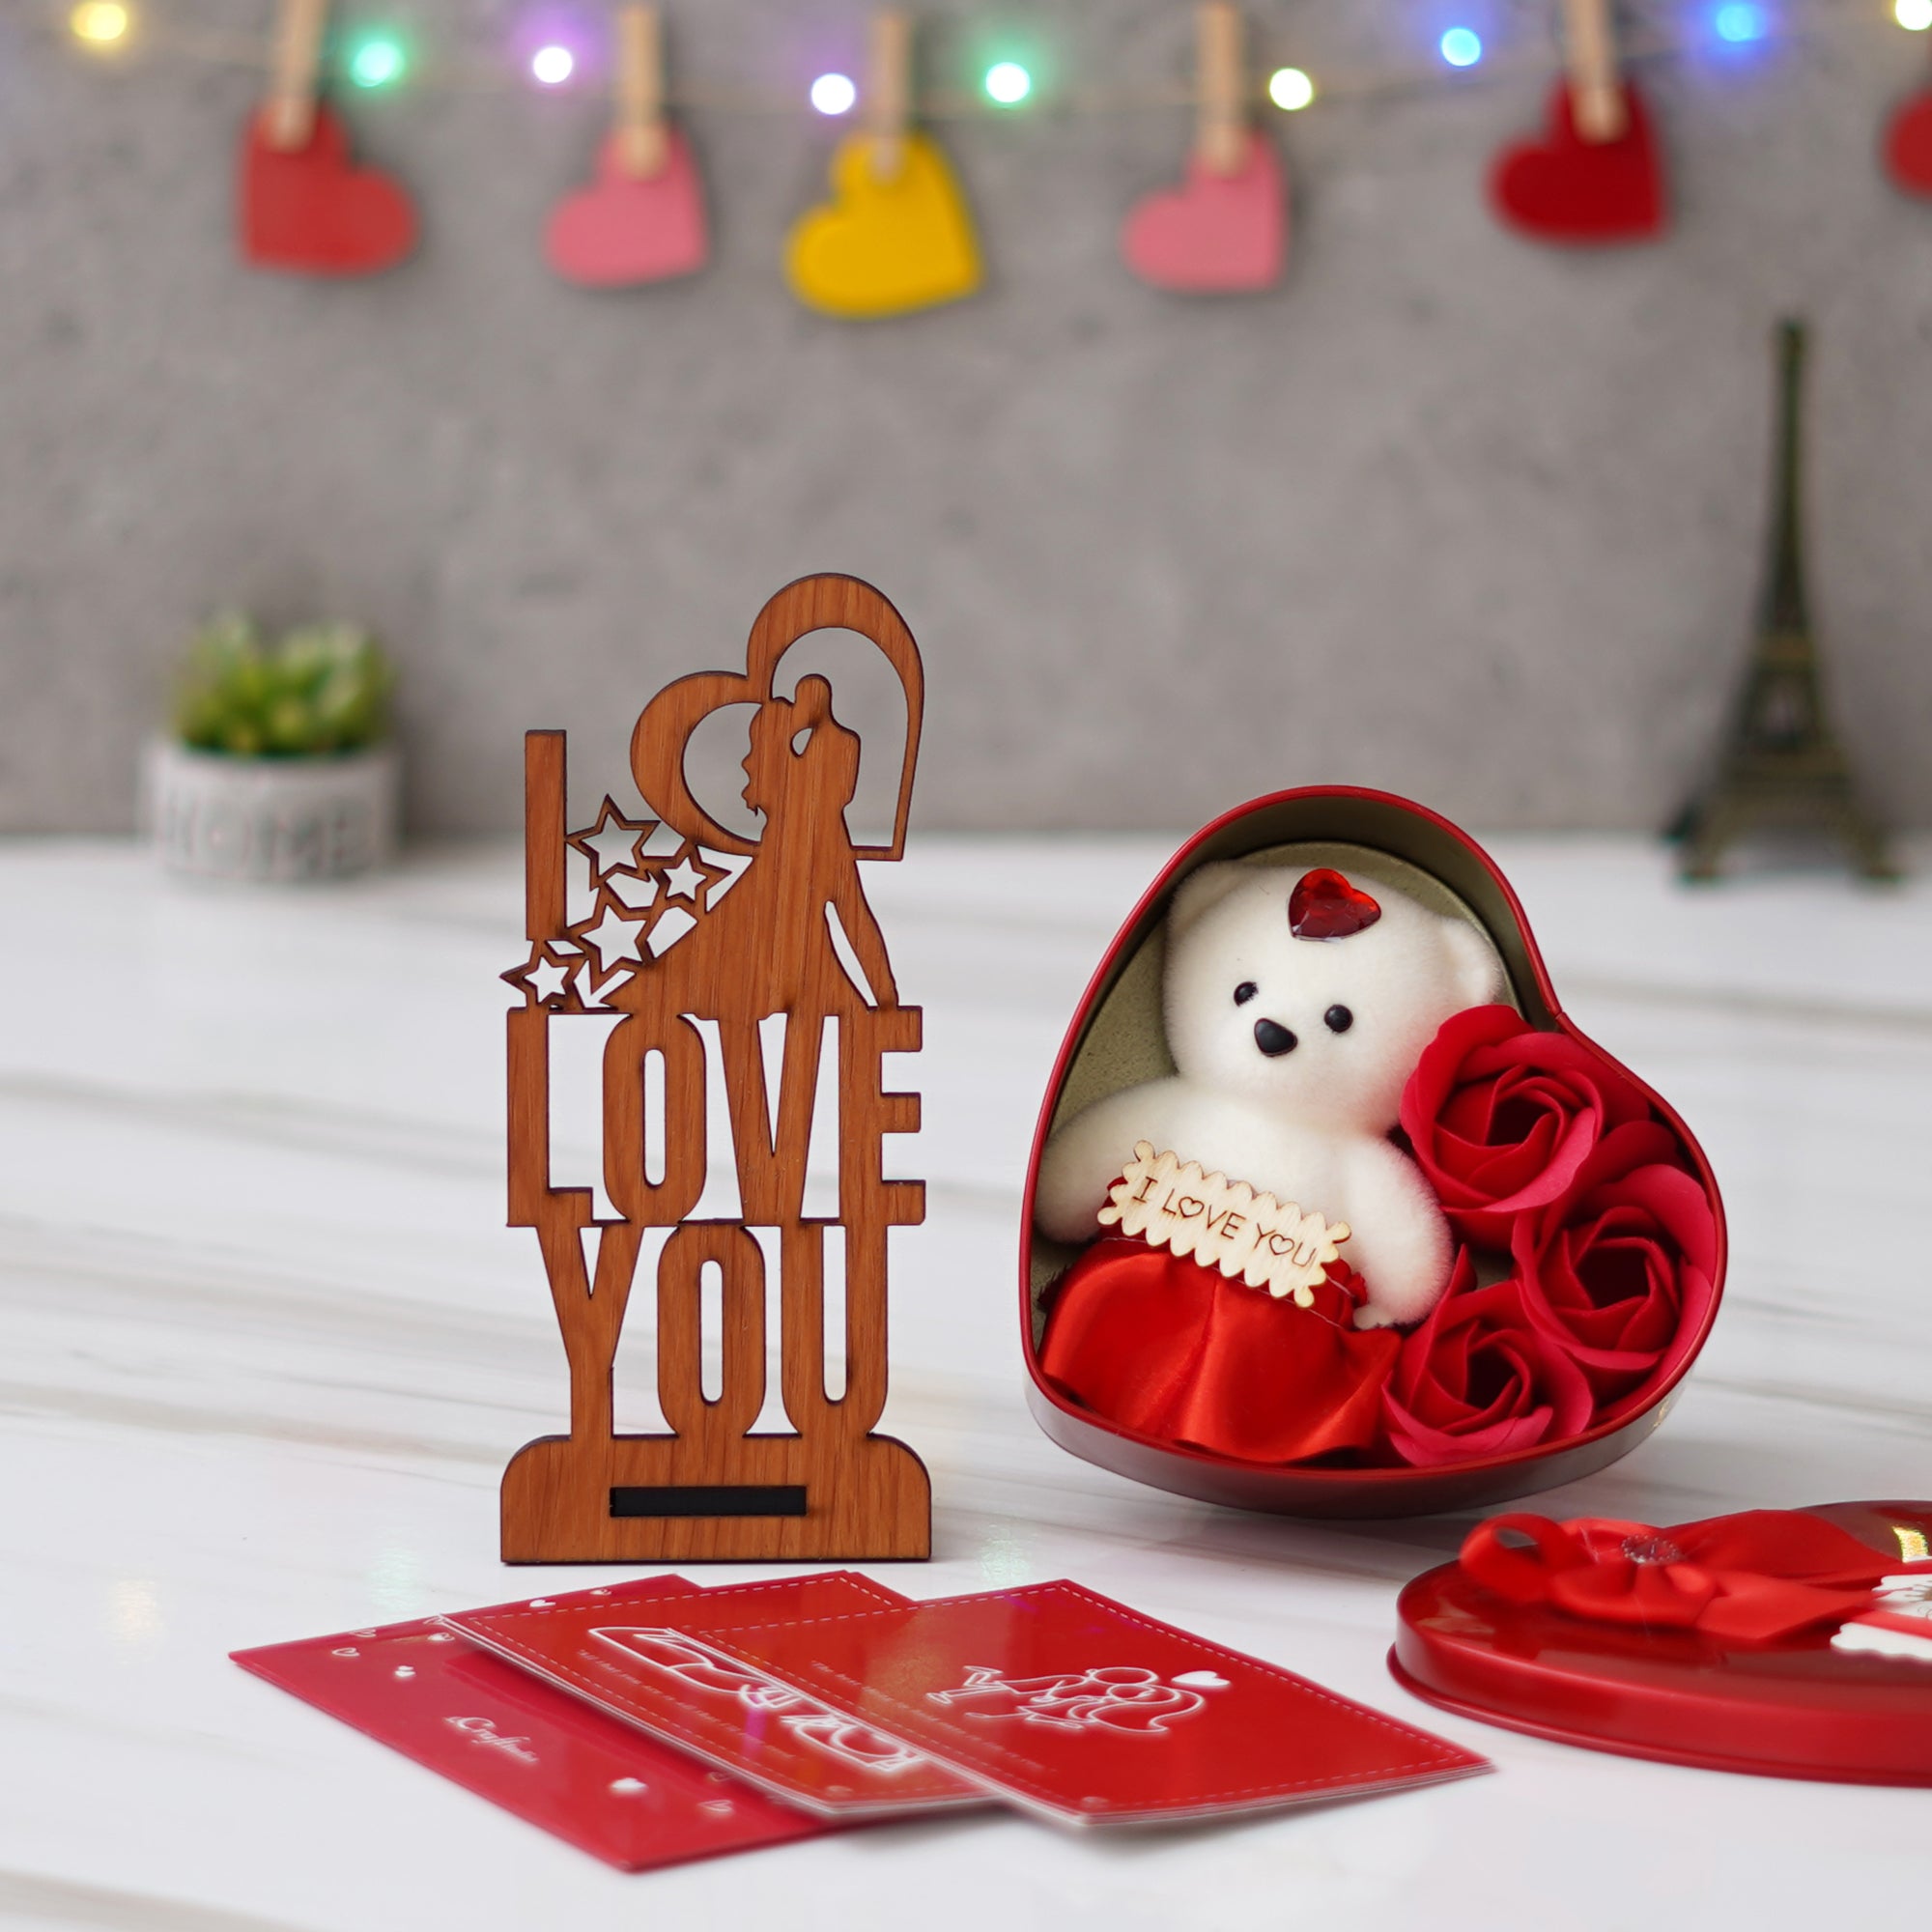 Valentine Combo of Pack of 8 Love Gift Cards, "Love You" Wooden Showpiece With Stand, Heart Shaped Gift Box Set with White Teddy and Red Roses